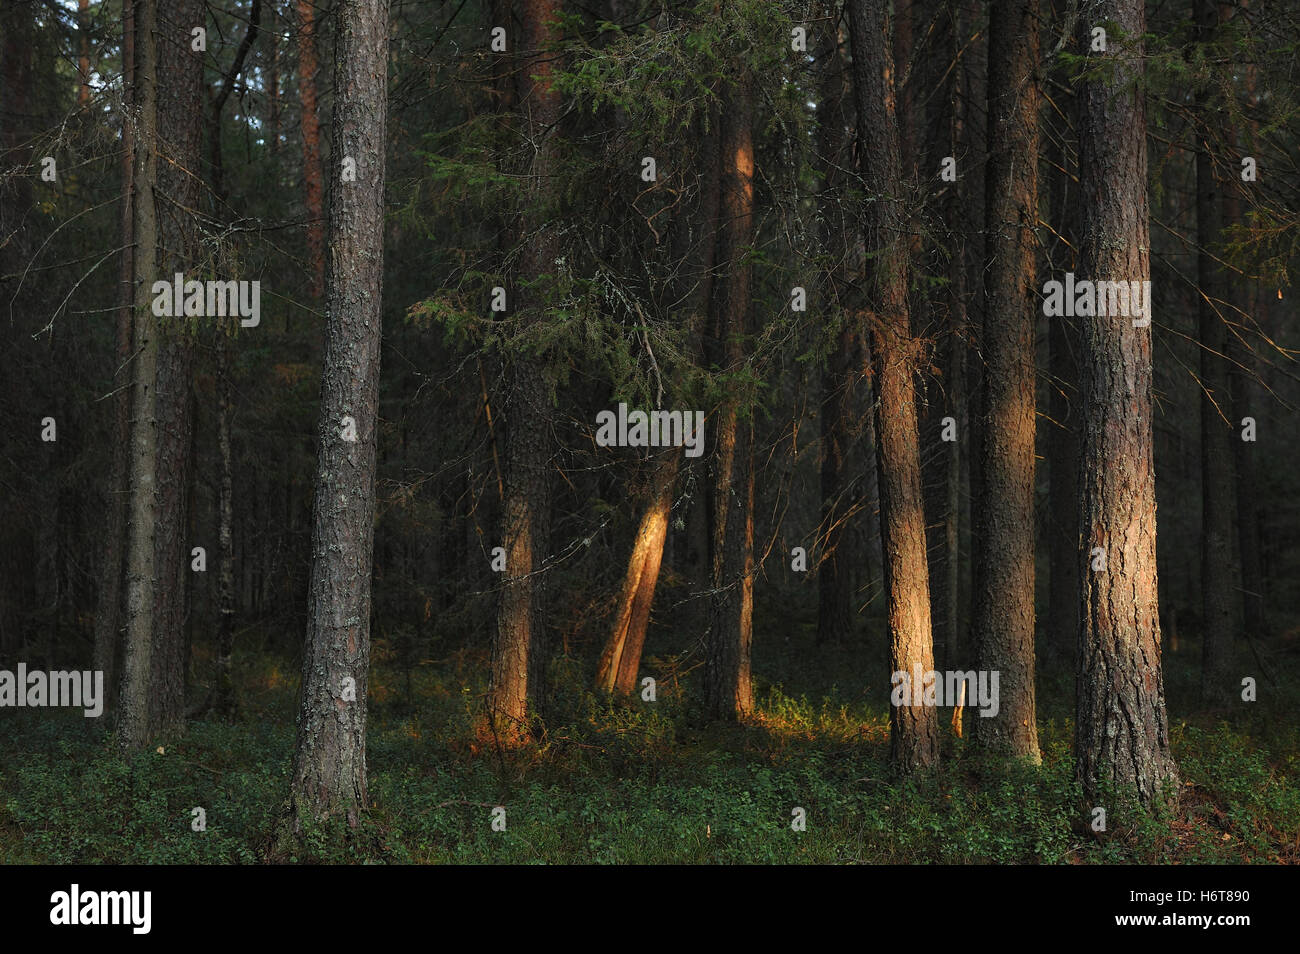 Landscape. Trees in the taiga forest. Stock Photo